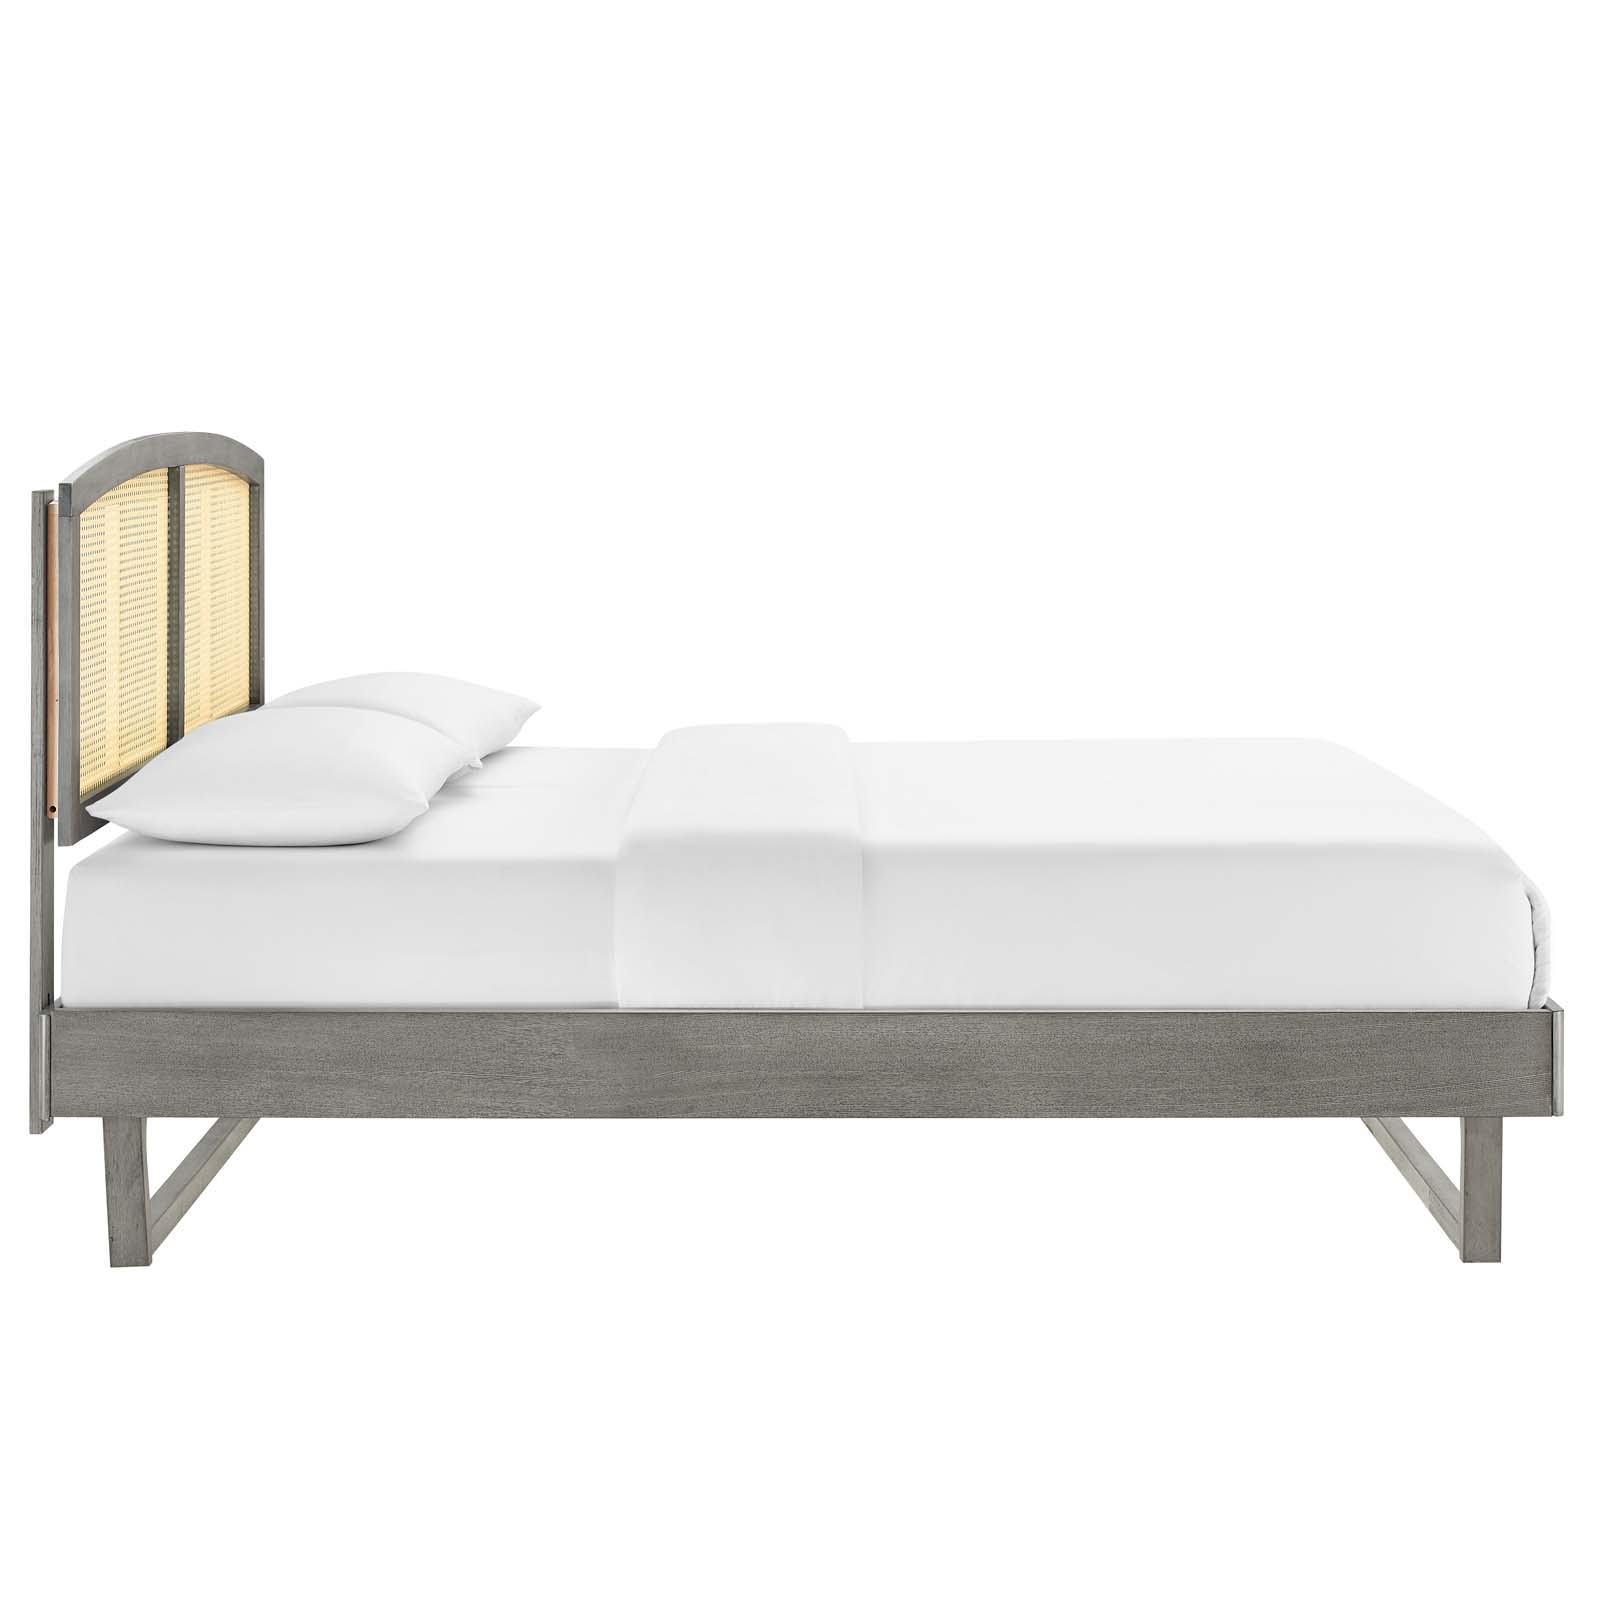 Sierra Cane And Wood Queen Platform Bed With Angular Legs, Gray